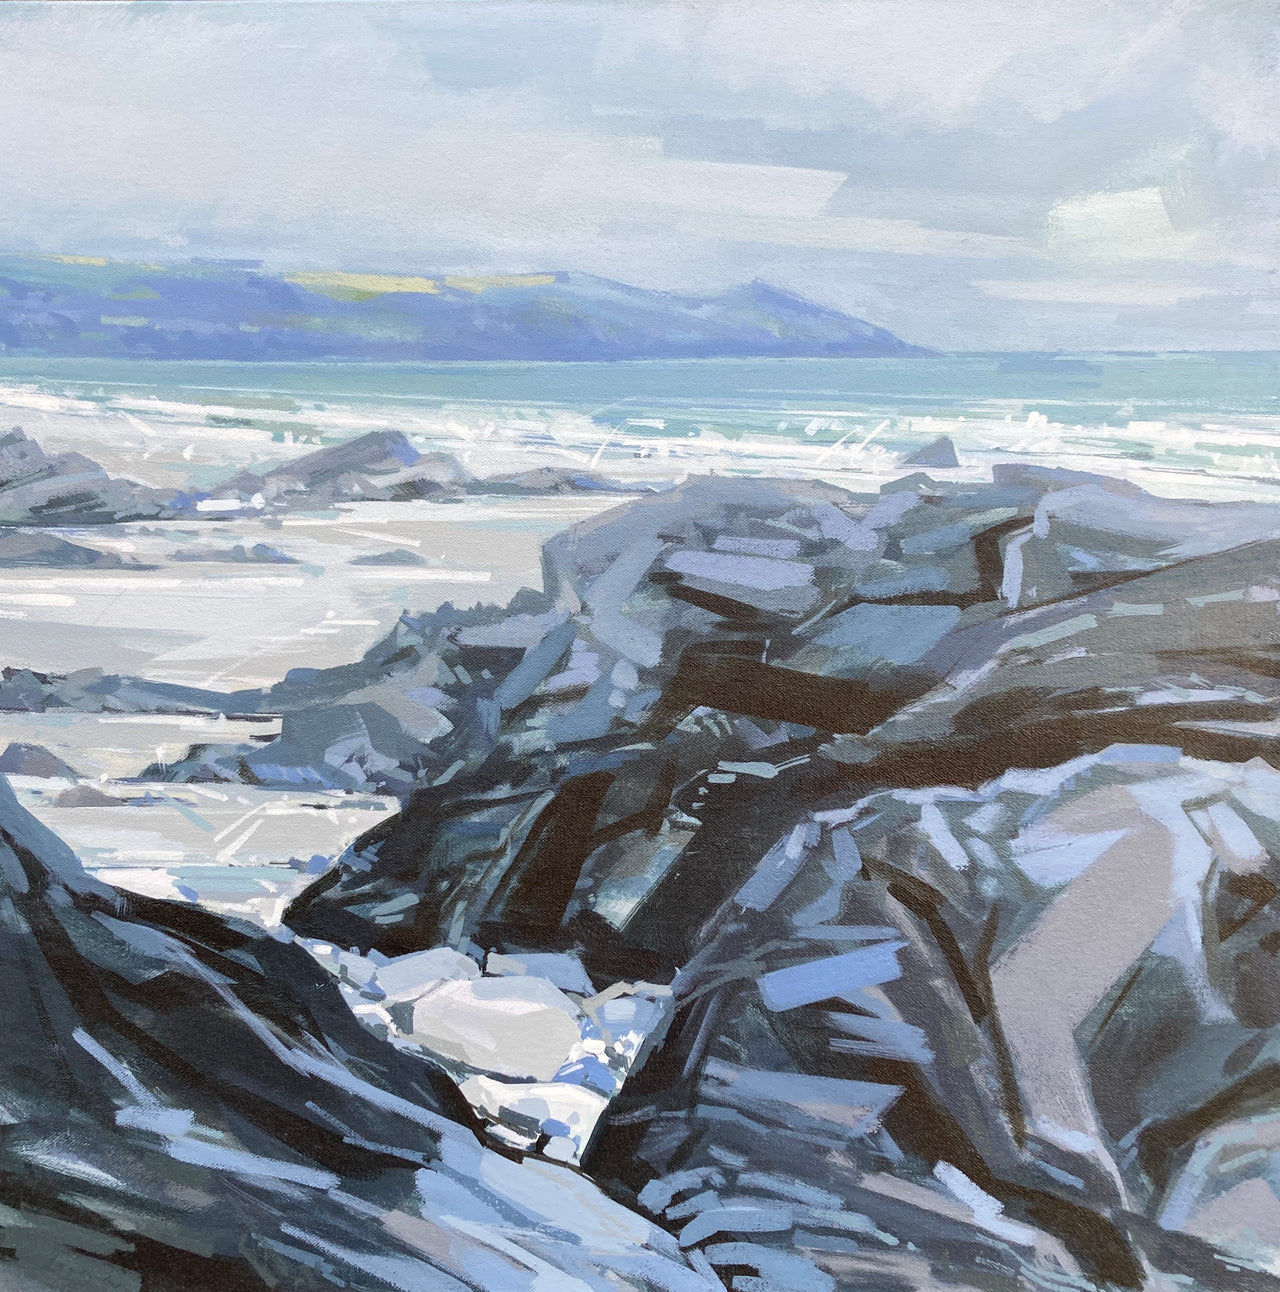 Rocks surrounded by sea with peninsula in the background, blue sky and white clouds by Cornish artist Imogen Bone